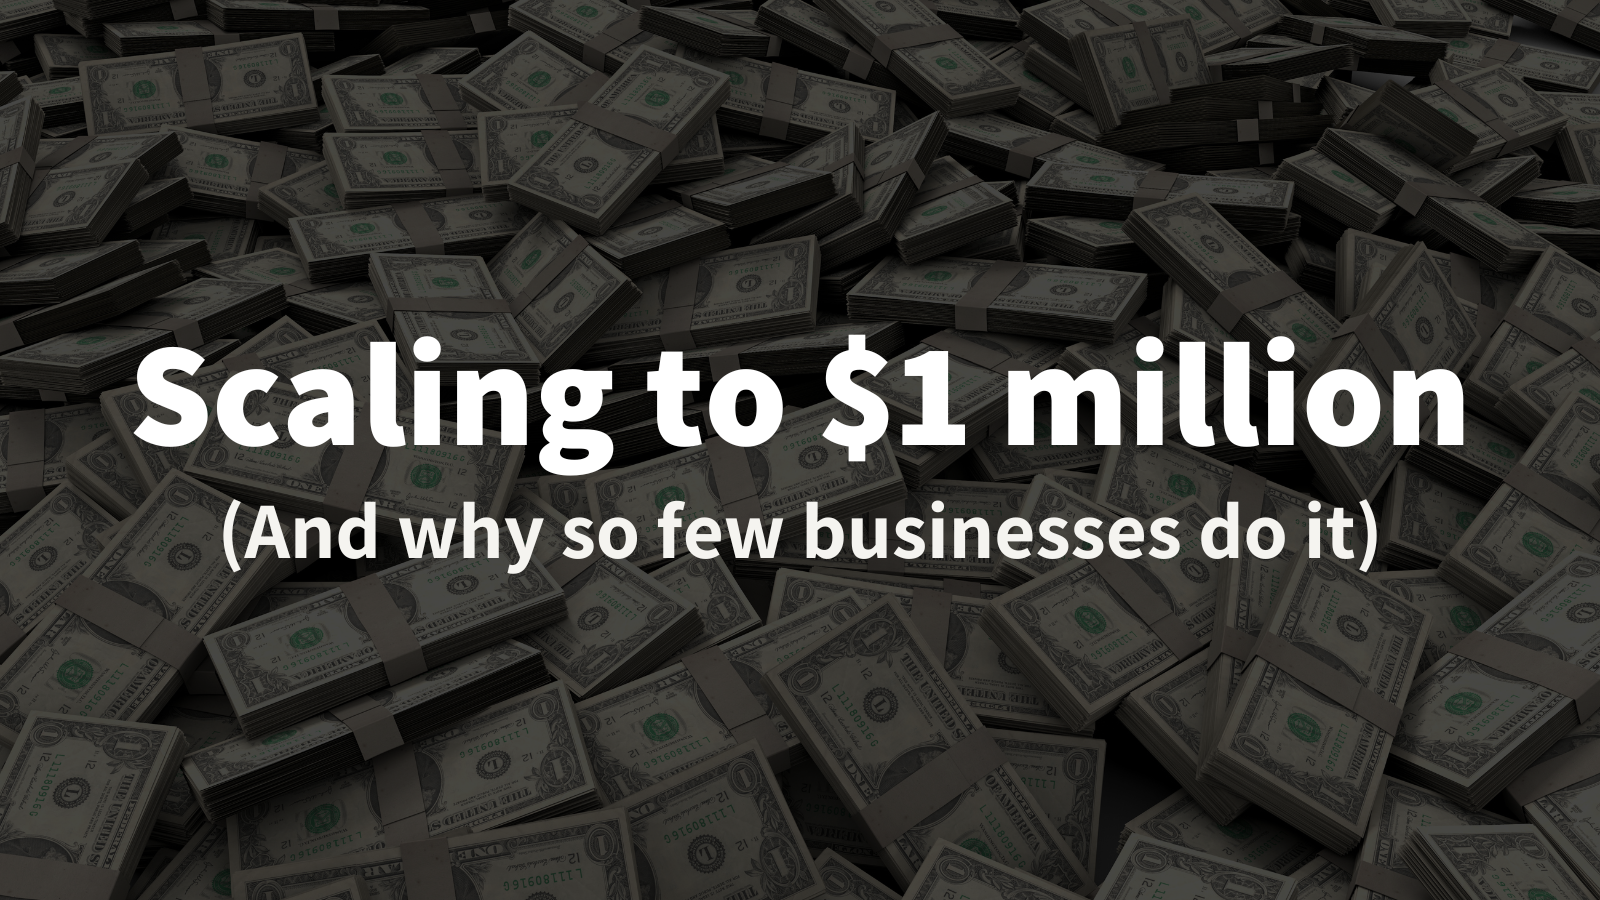 Scaling to $1 million: What You Need to Do to Beat 91% of Businesses